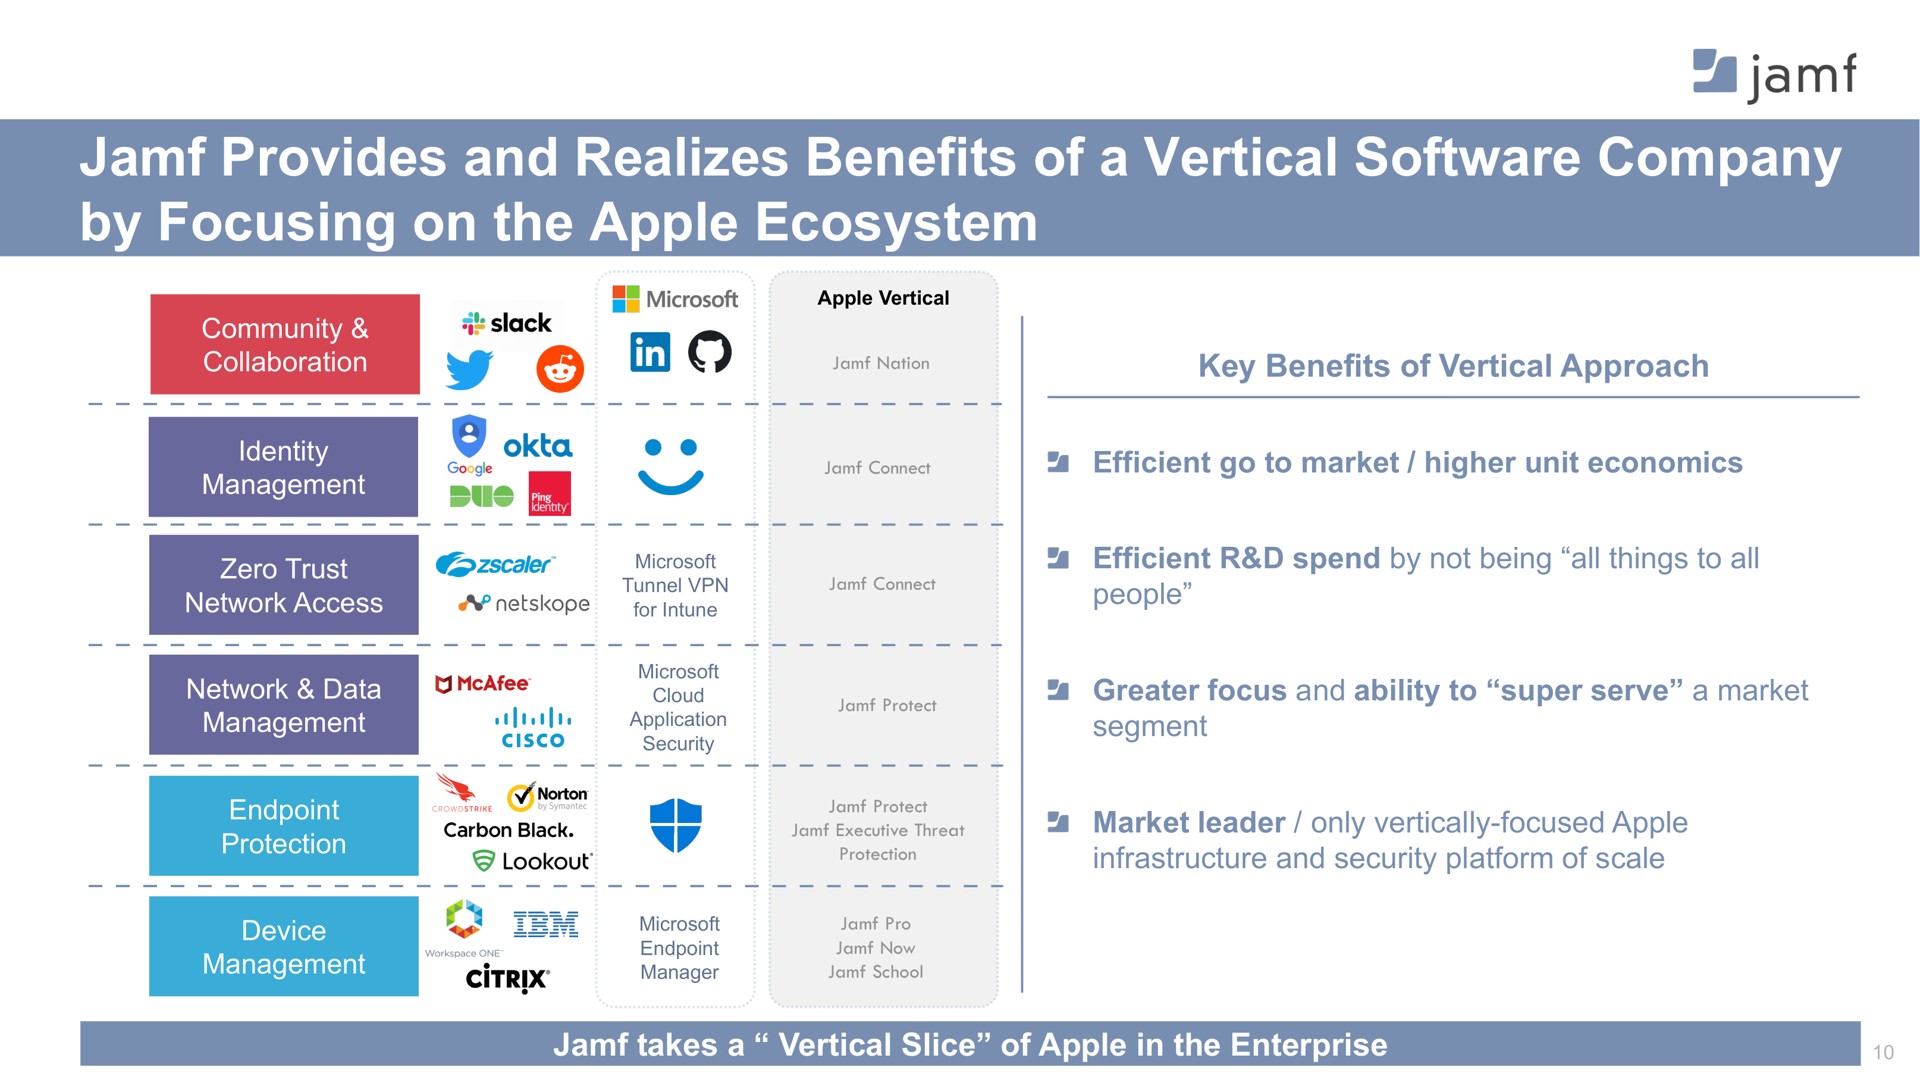 provides and realizes benefits of a vertical company by focusing on the apple ecosystem | Jamf